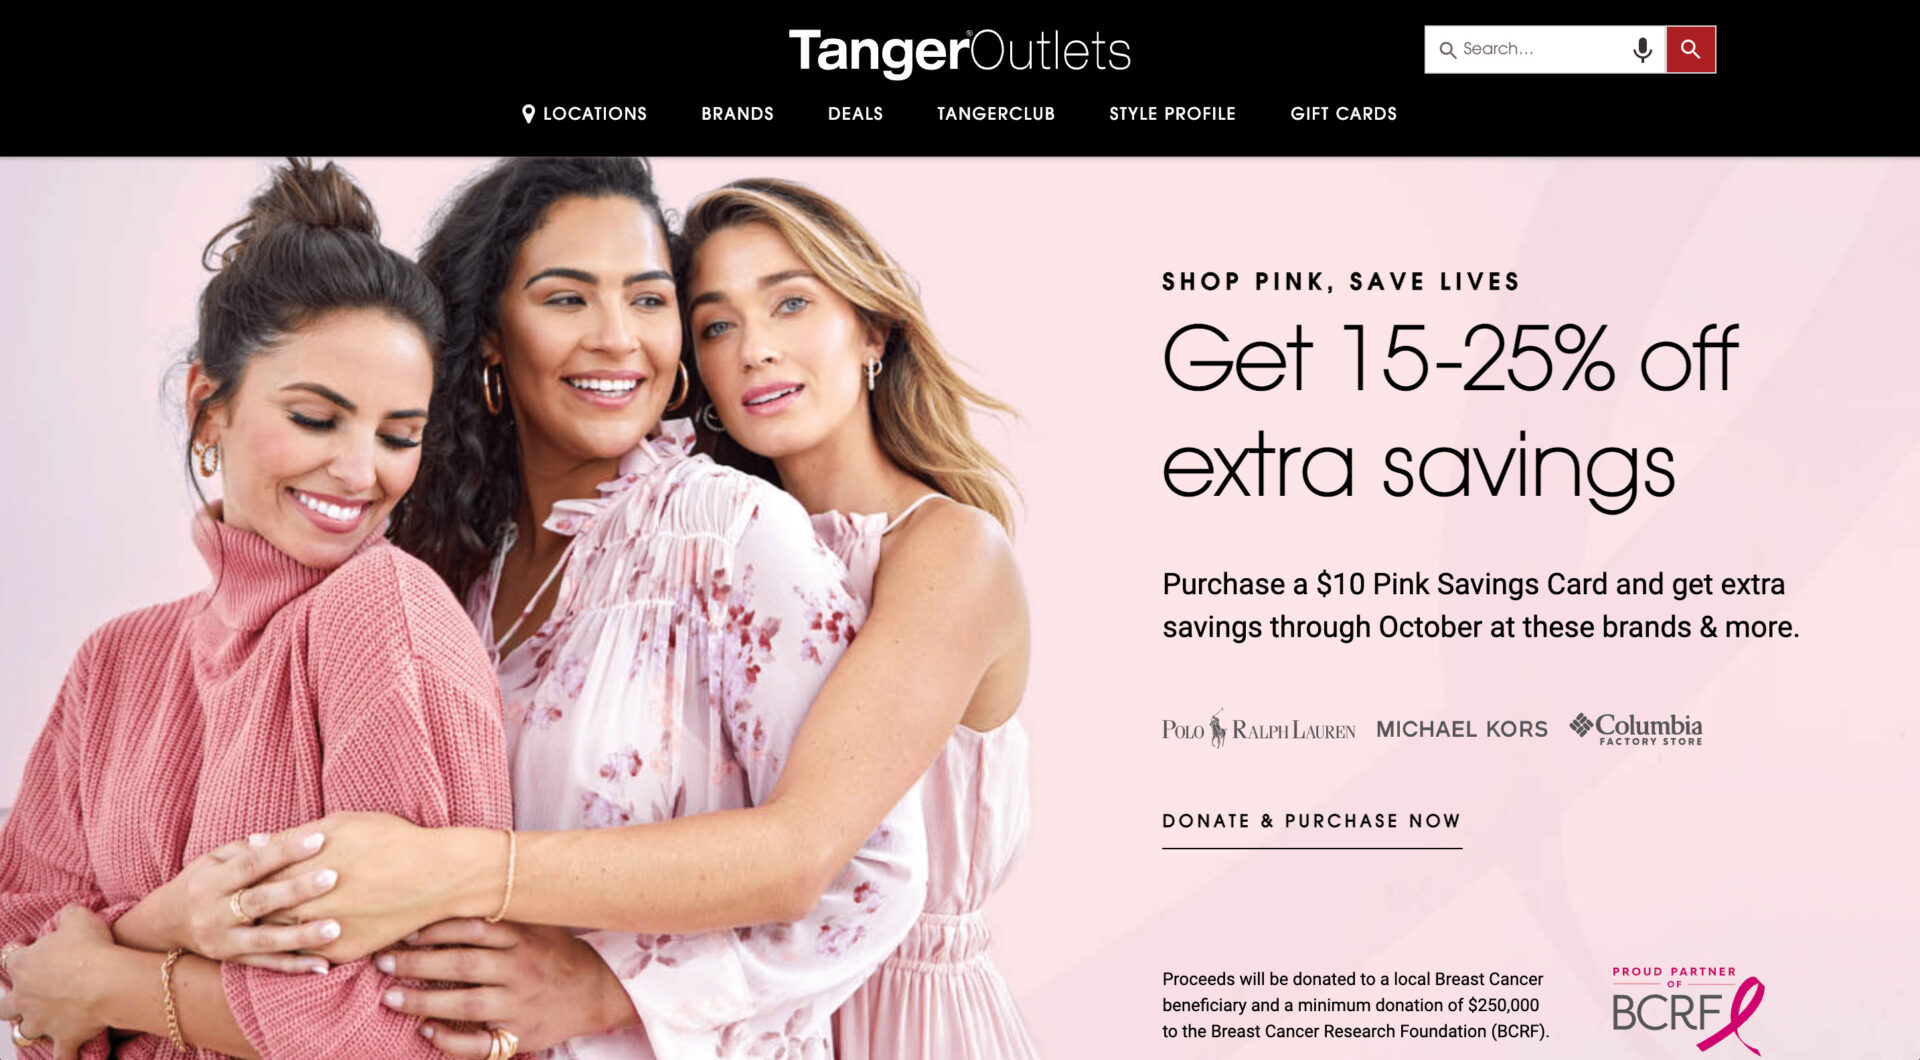 Homepage of Tanger Outlets—one of the famous luxury real estate brands